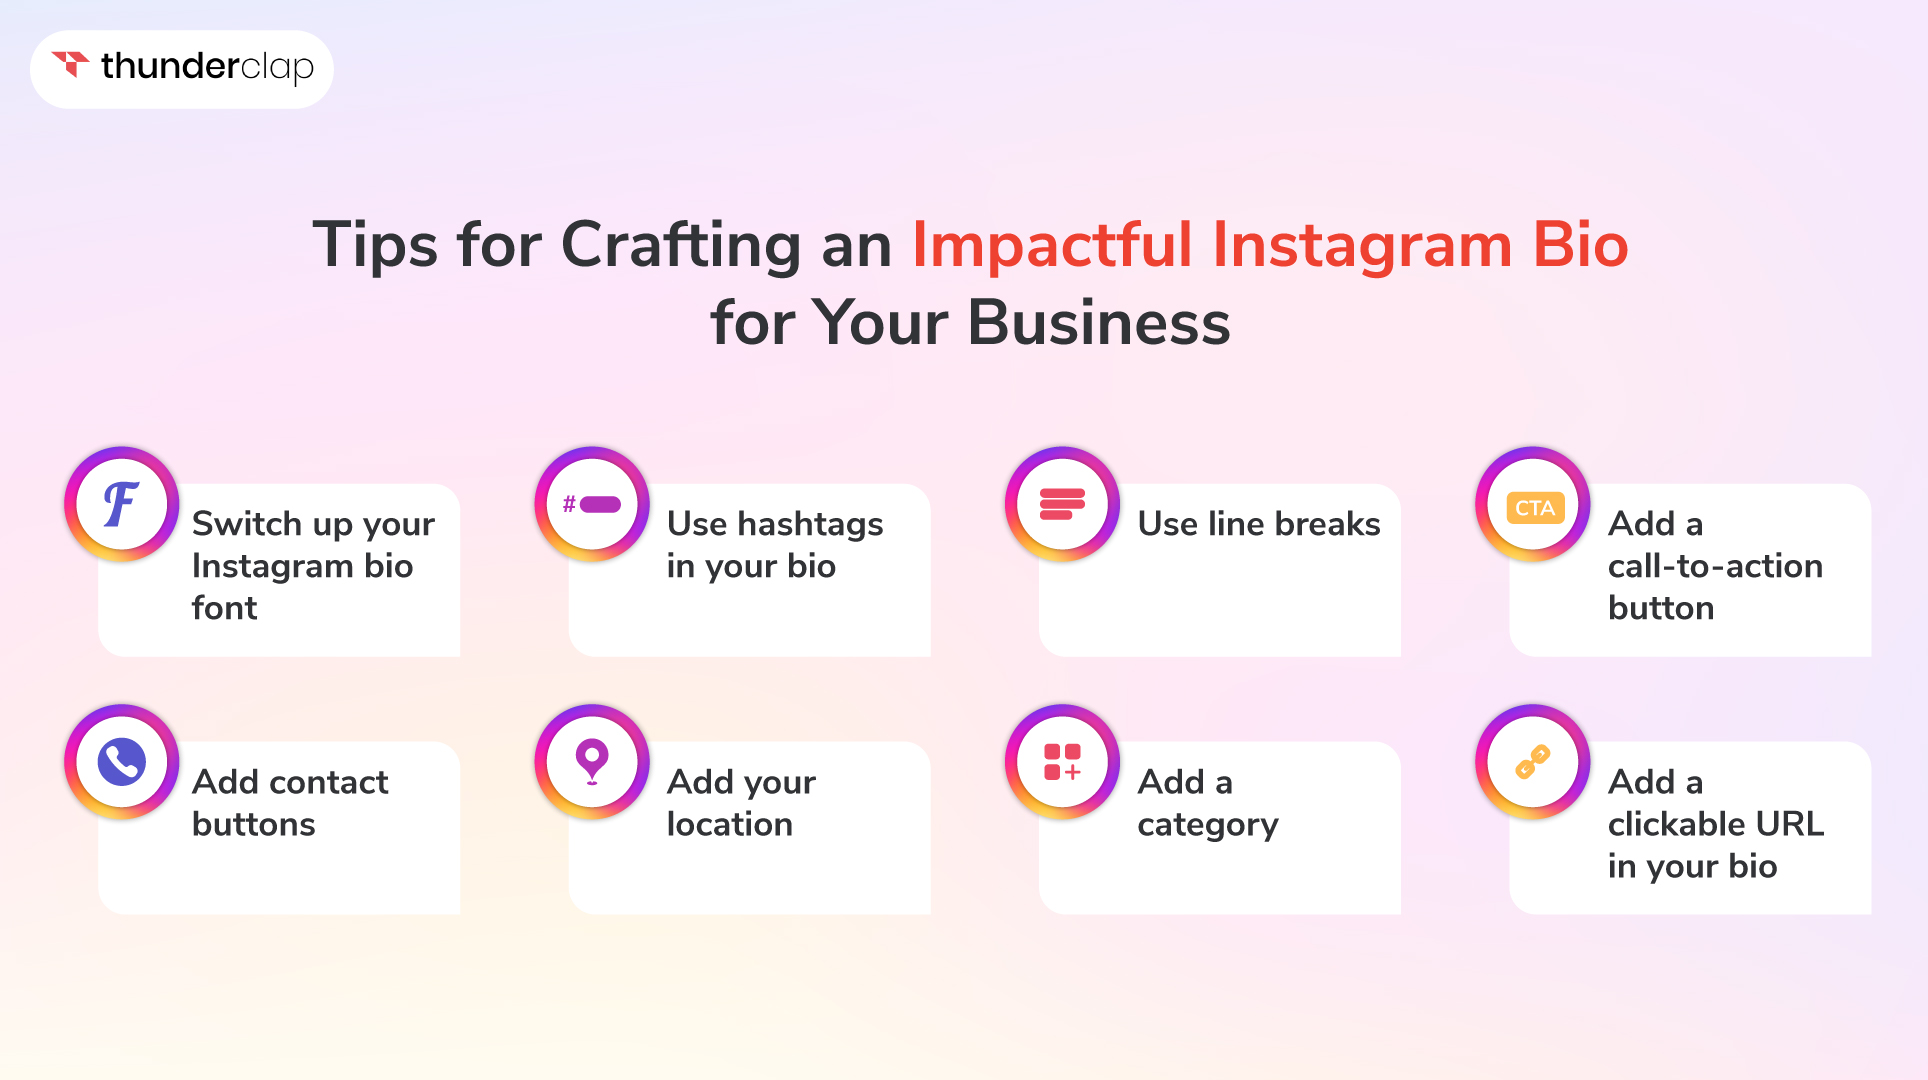 Tips for Crafting an Impactful Instagram Bio for Your Business